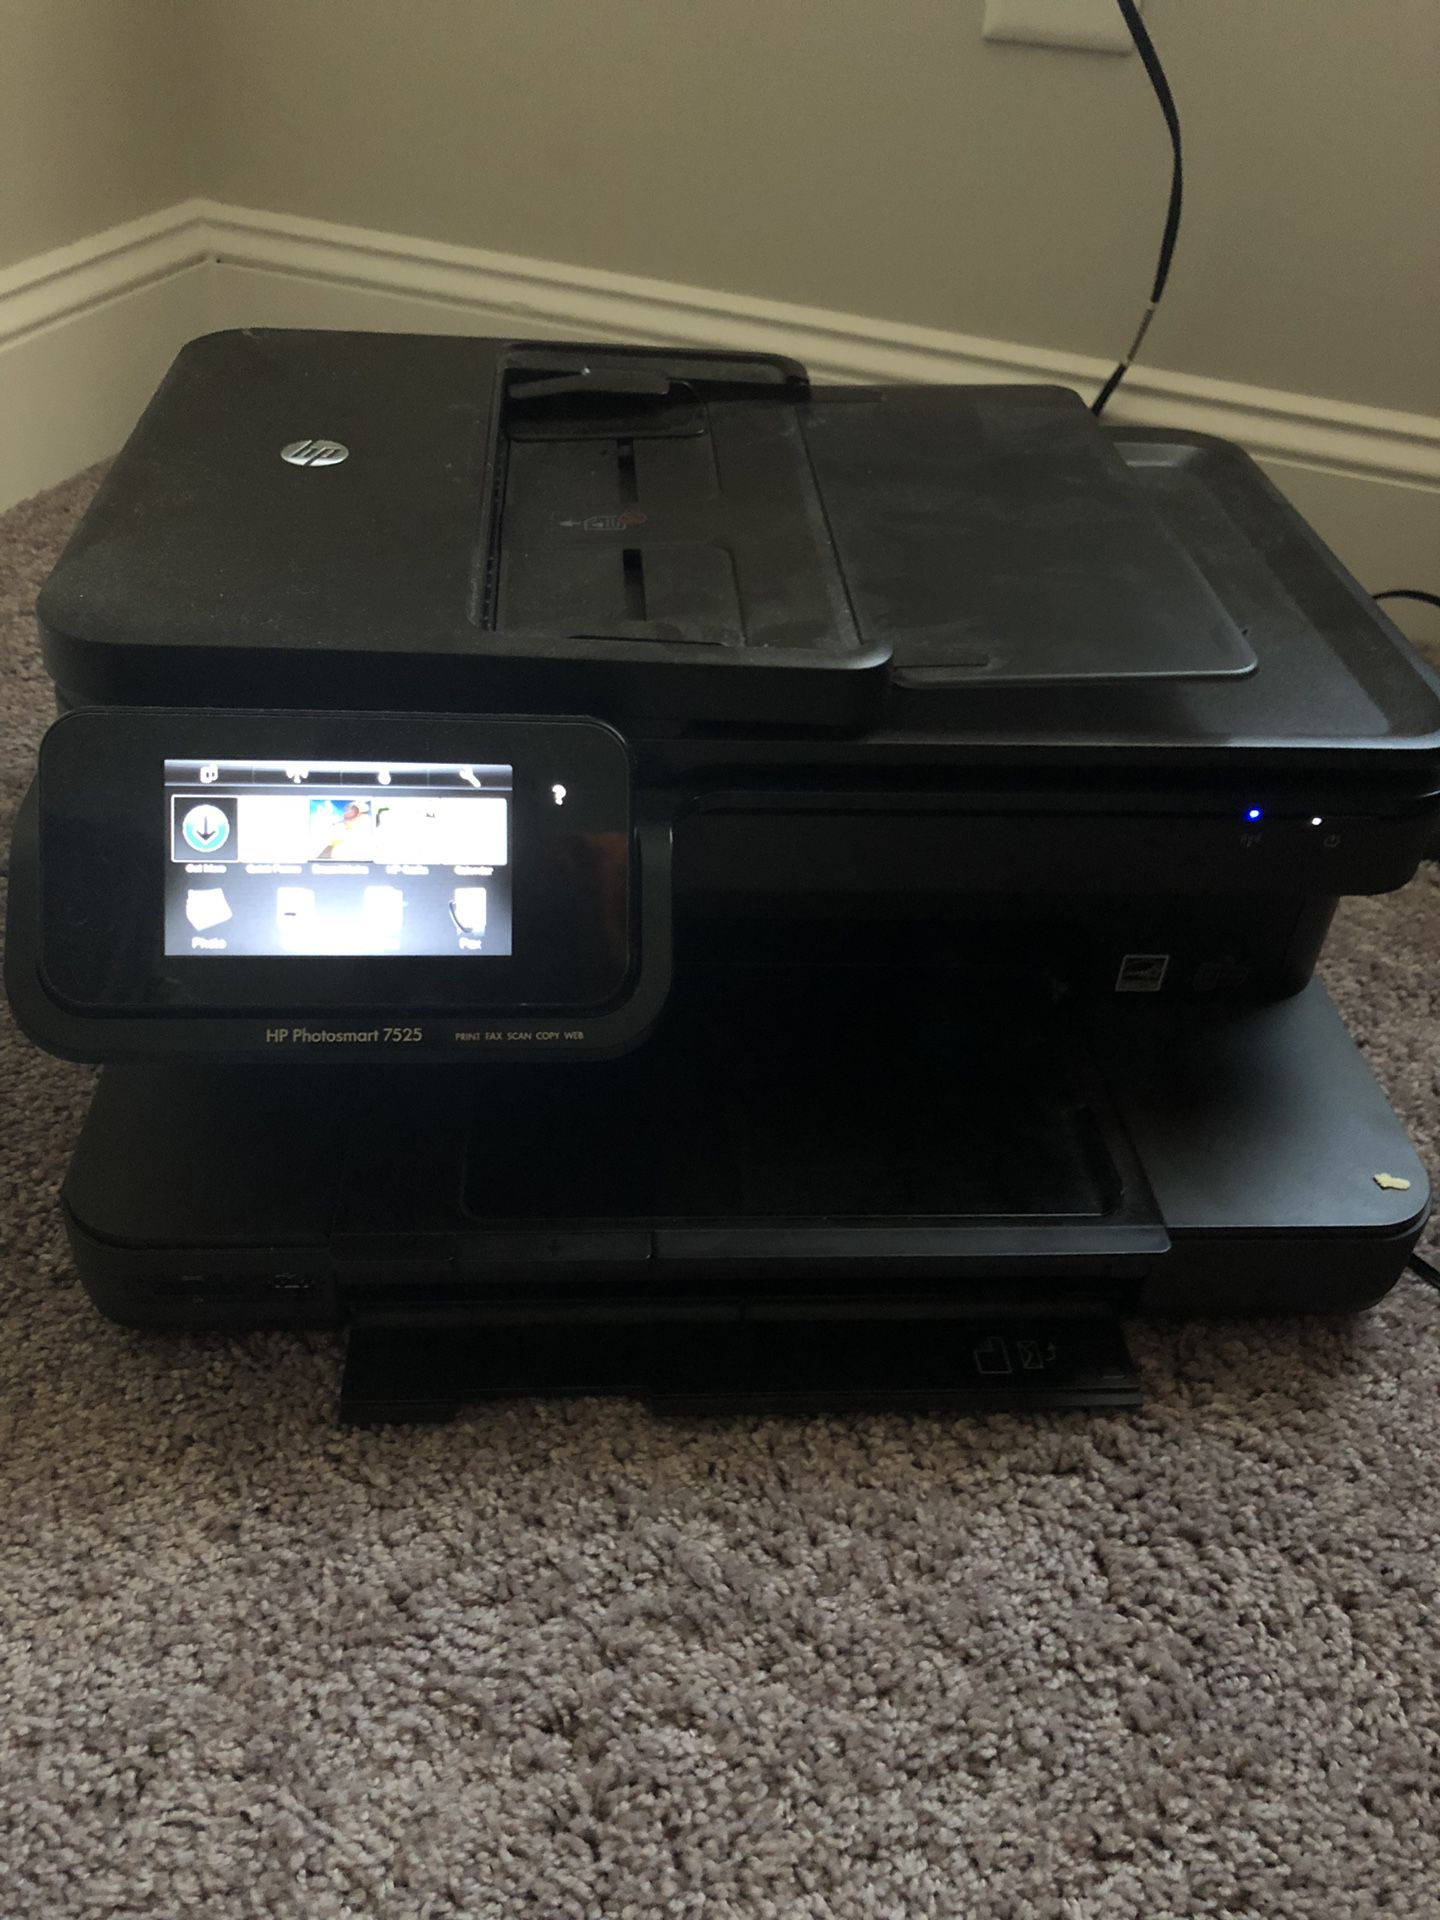 HP photosmart 7525 5 in 1 printer,fax,scan,copy and web